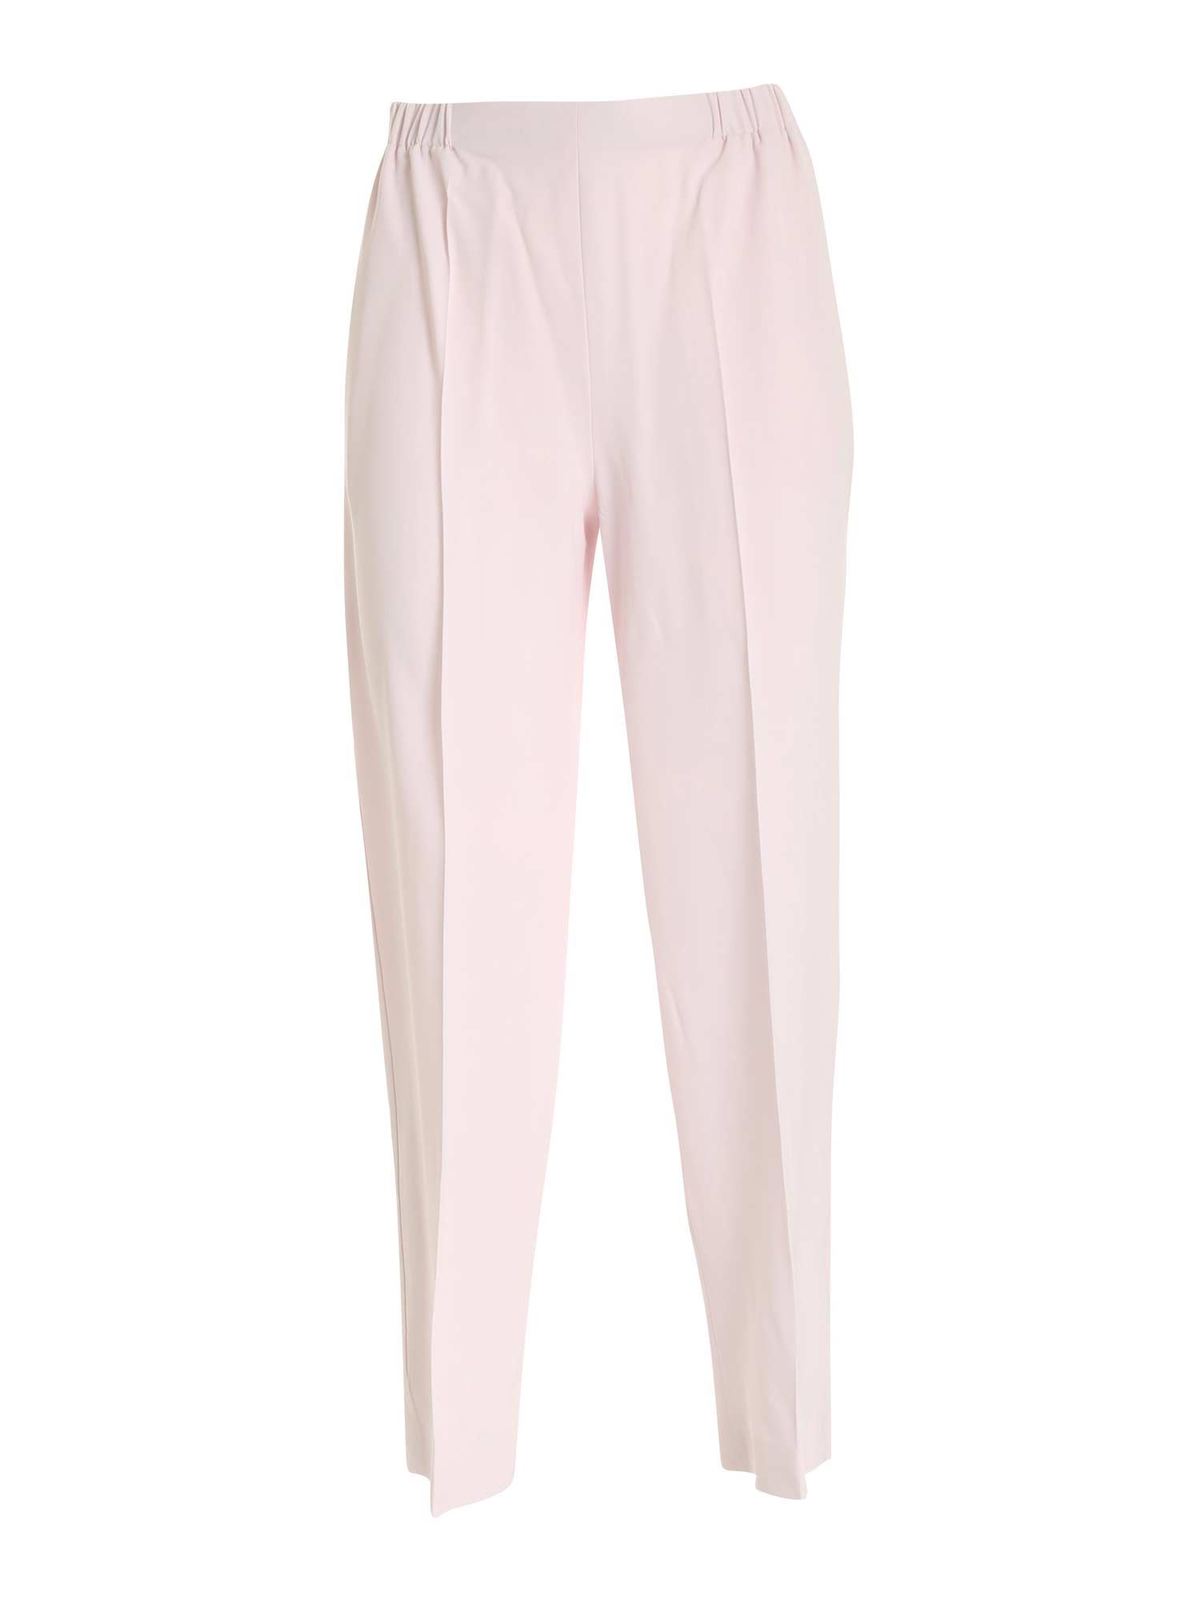 Les Copains Ironed Crease Down The Leg Pants In Pink